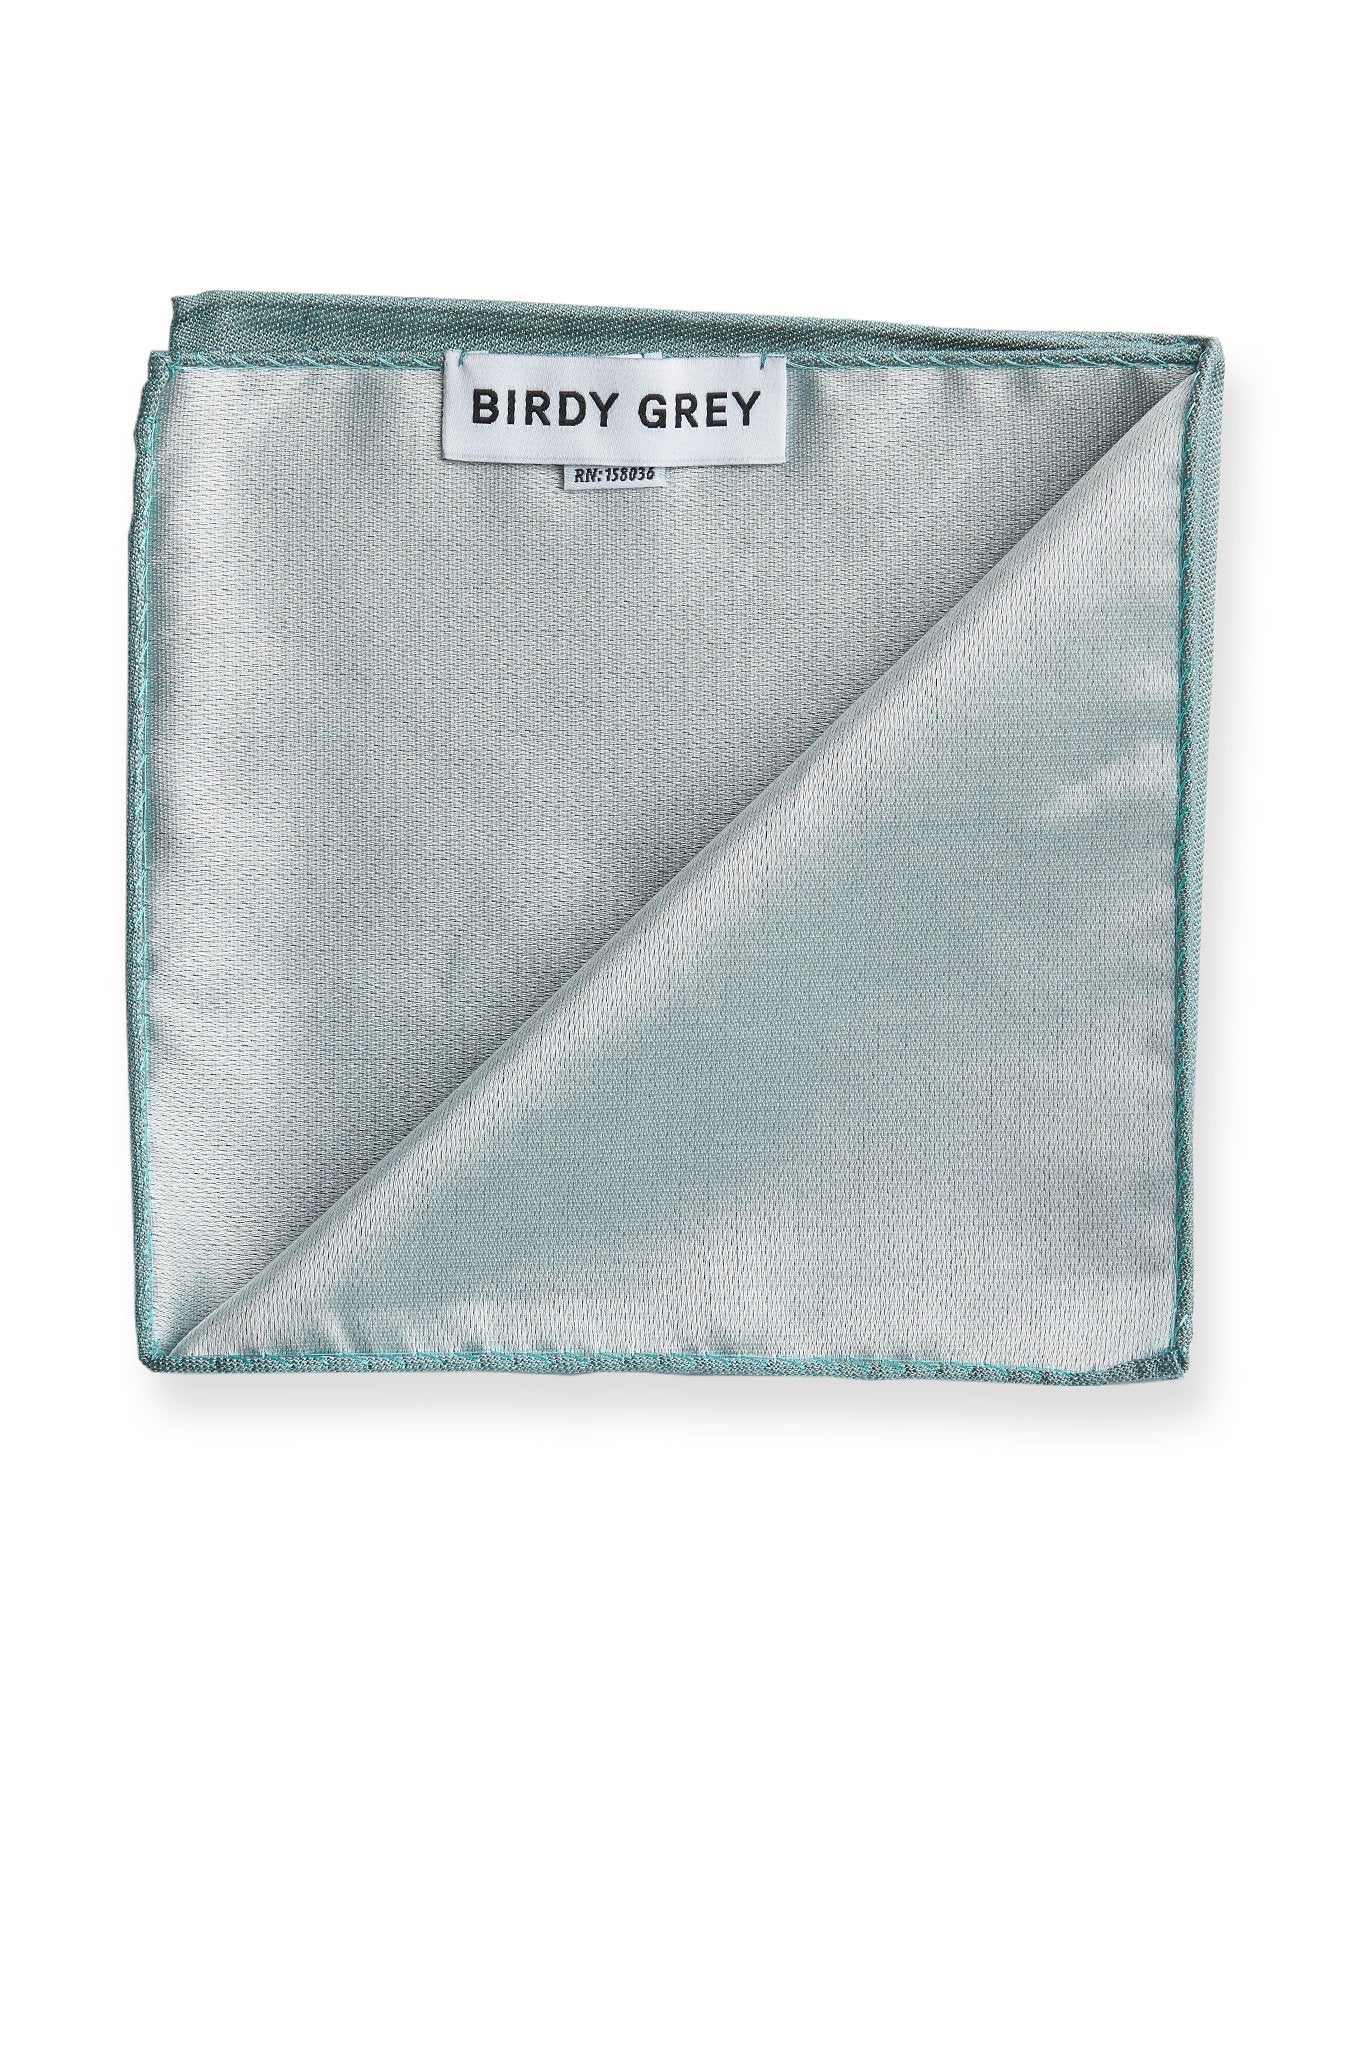 Back view of the Didi Pocket Square in sea glass reveals a silvery satin finish with a rolled hem. Attached to the hem is a label that says, “Birdy Grey.”